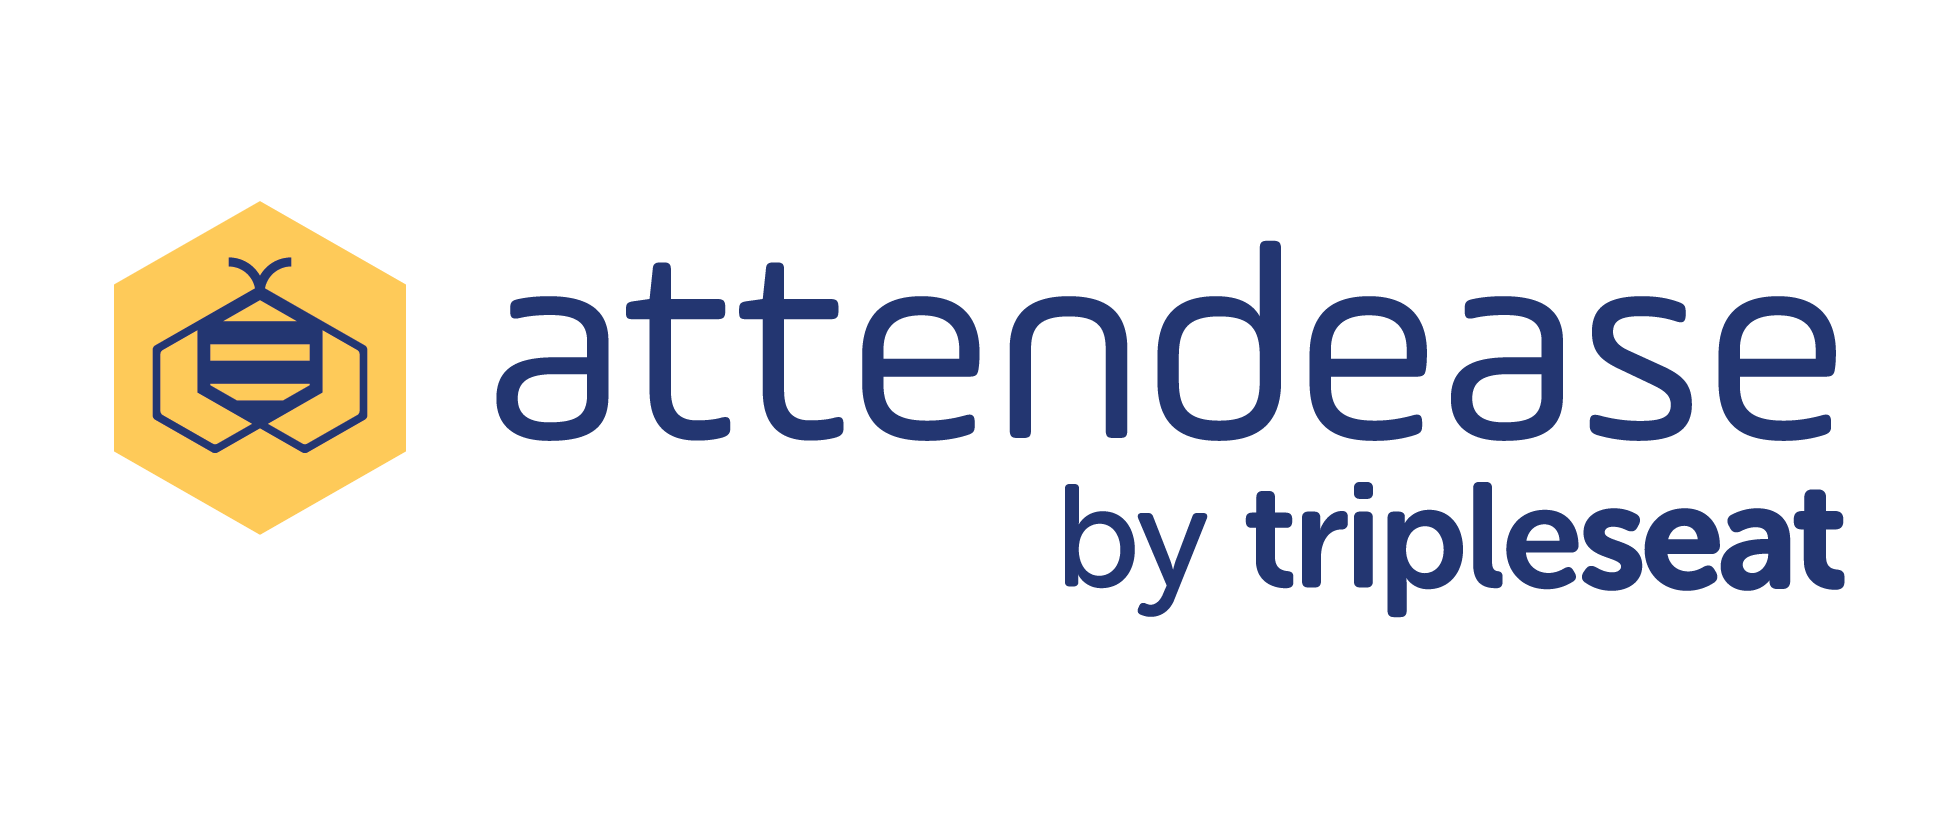 Attendease